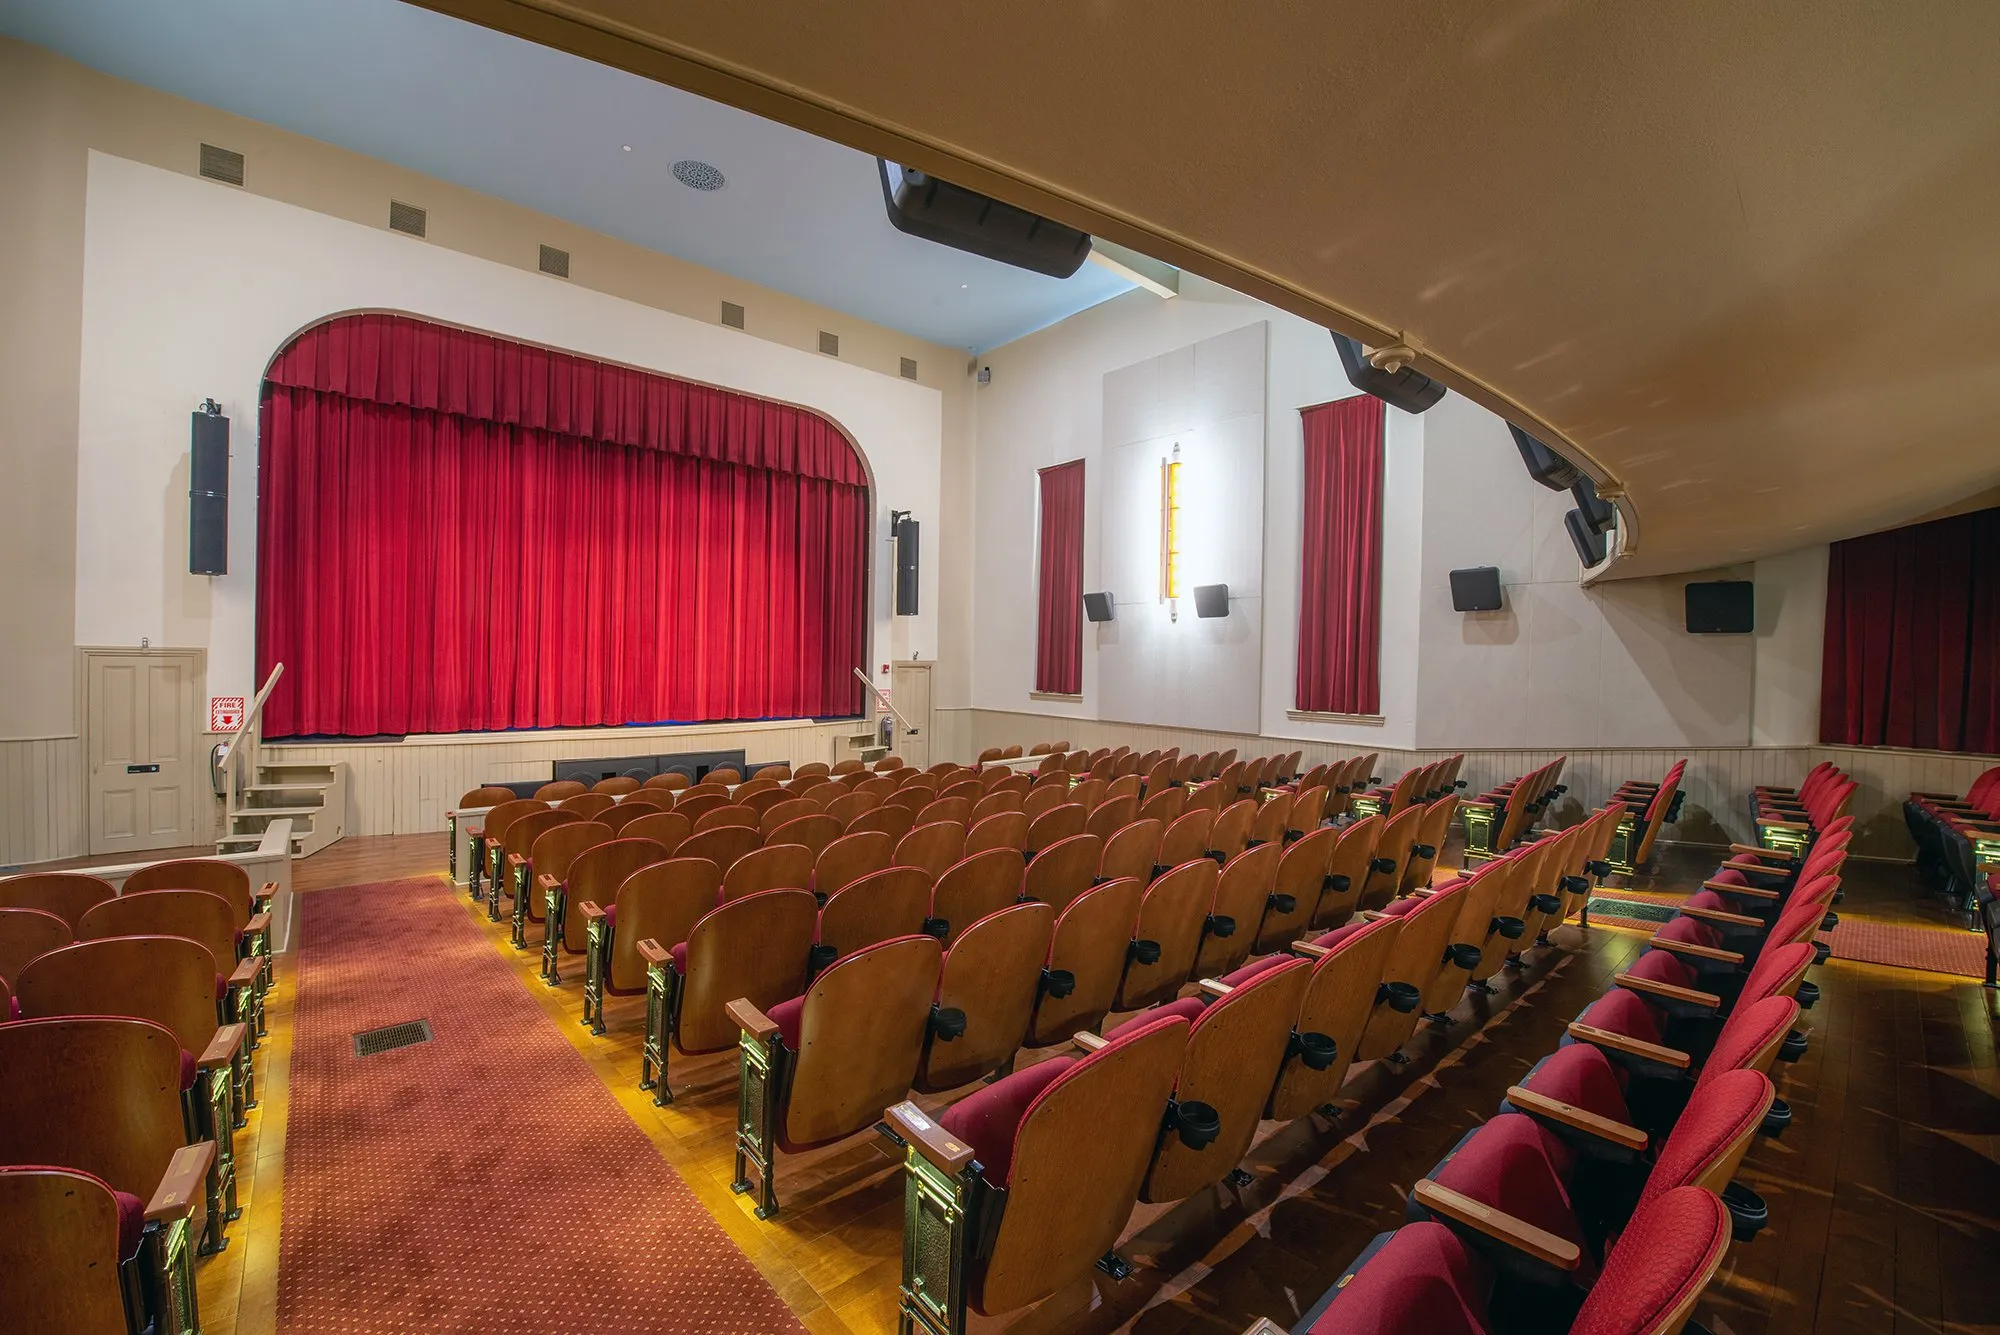 small theater with red carpet and a red curtain on the stage